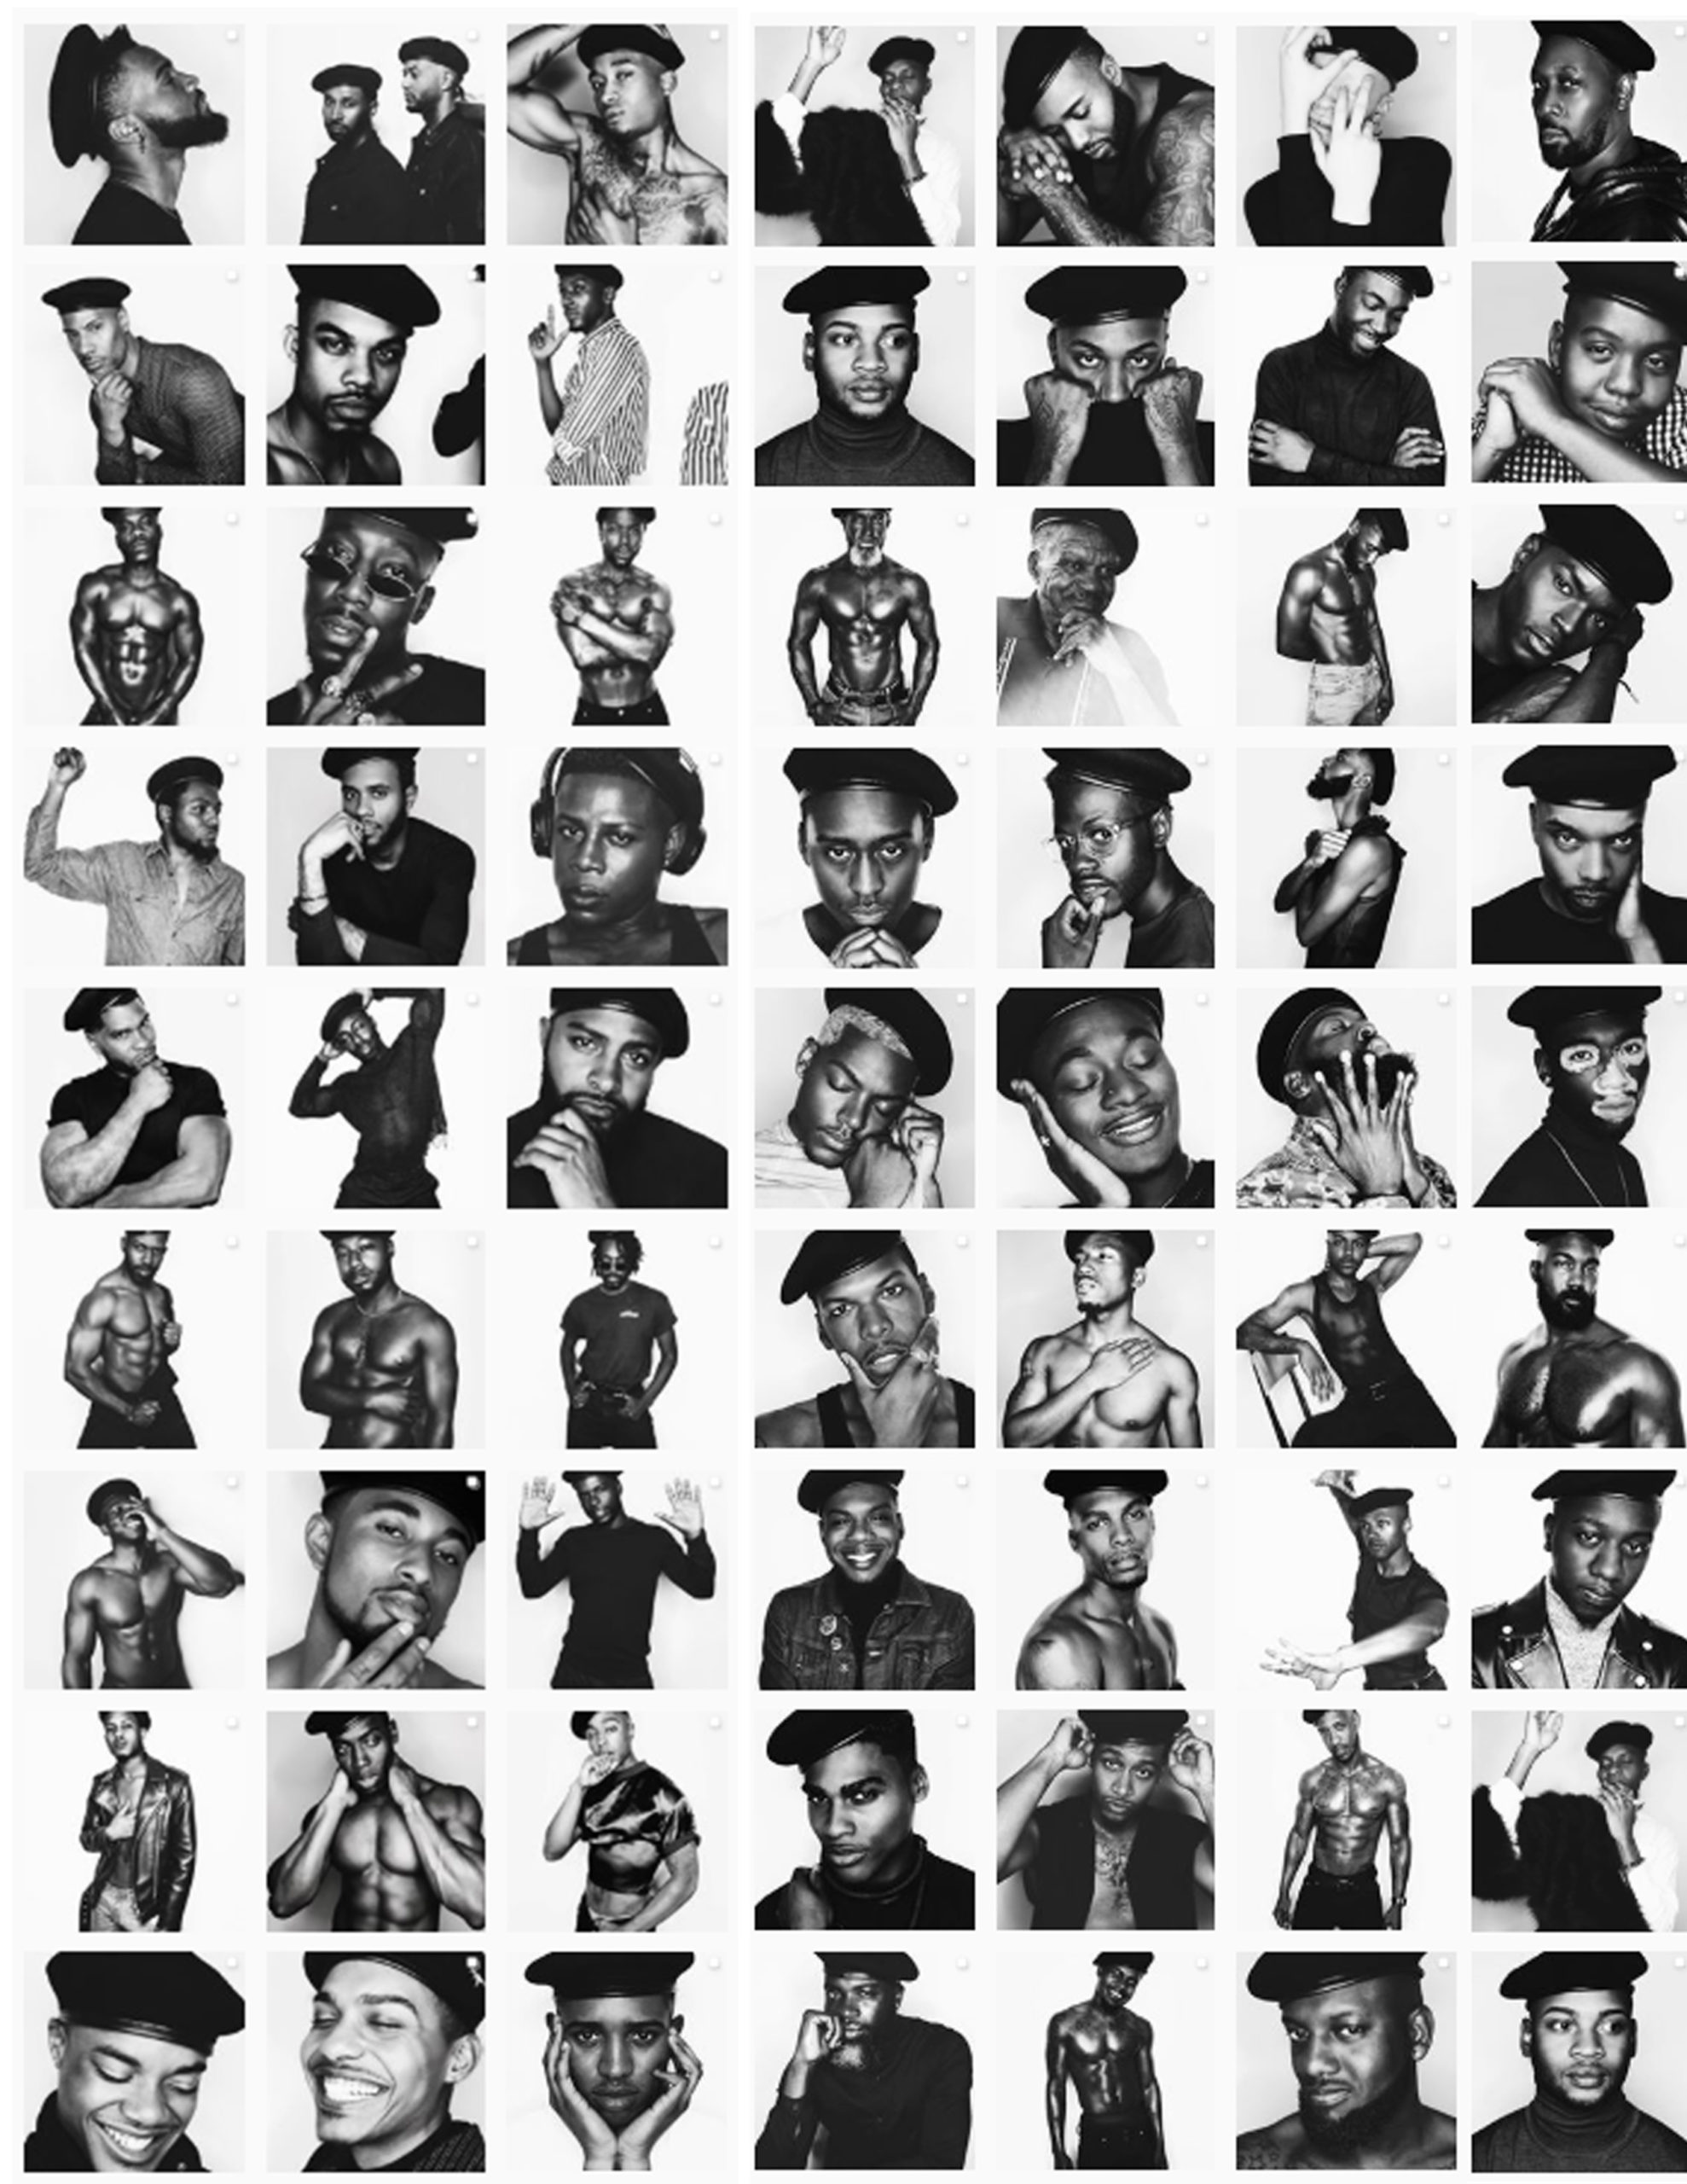 Photographic Storyteller Julian Ali examines the Black male image through ongoing project #BLACKkings